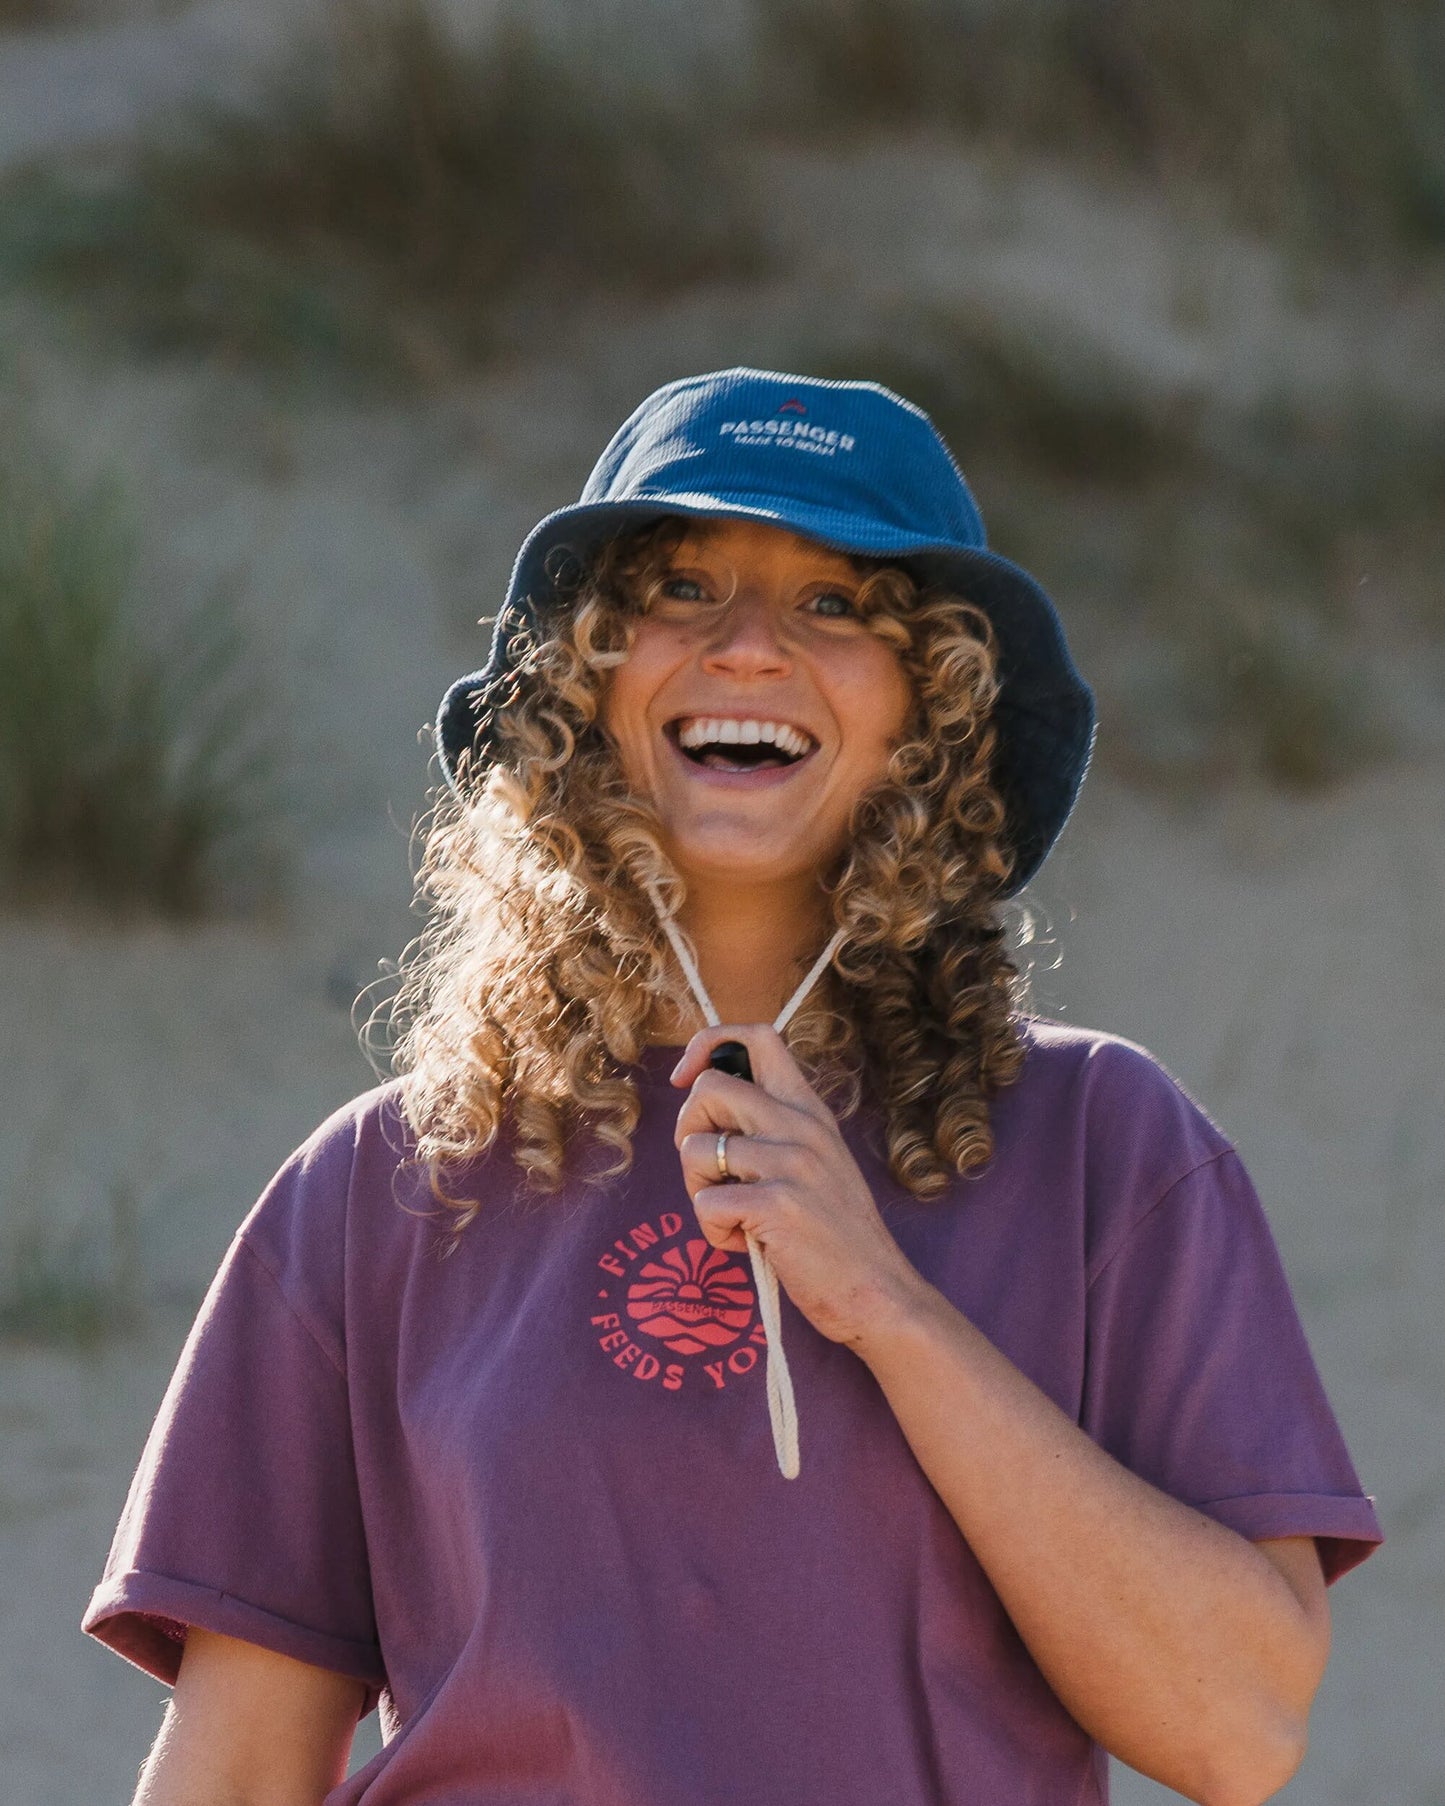 Womens_Forest Recycled Bucket Hat - Ash Blue